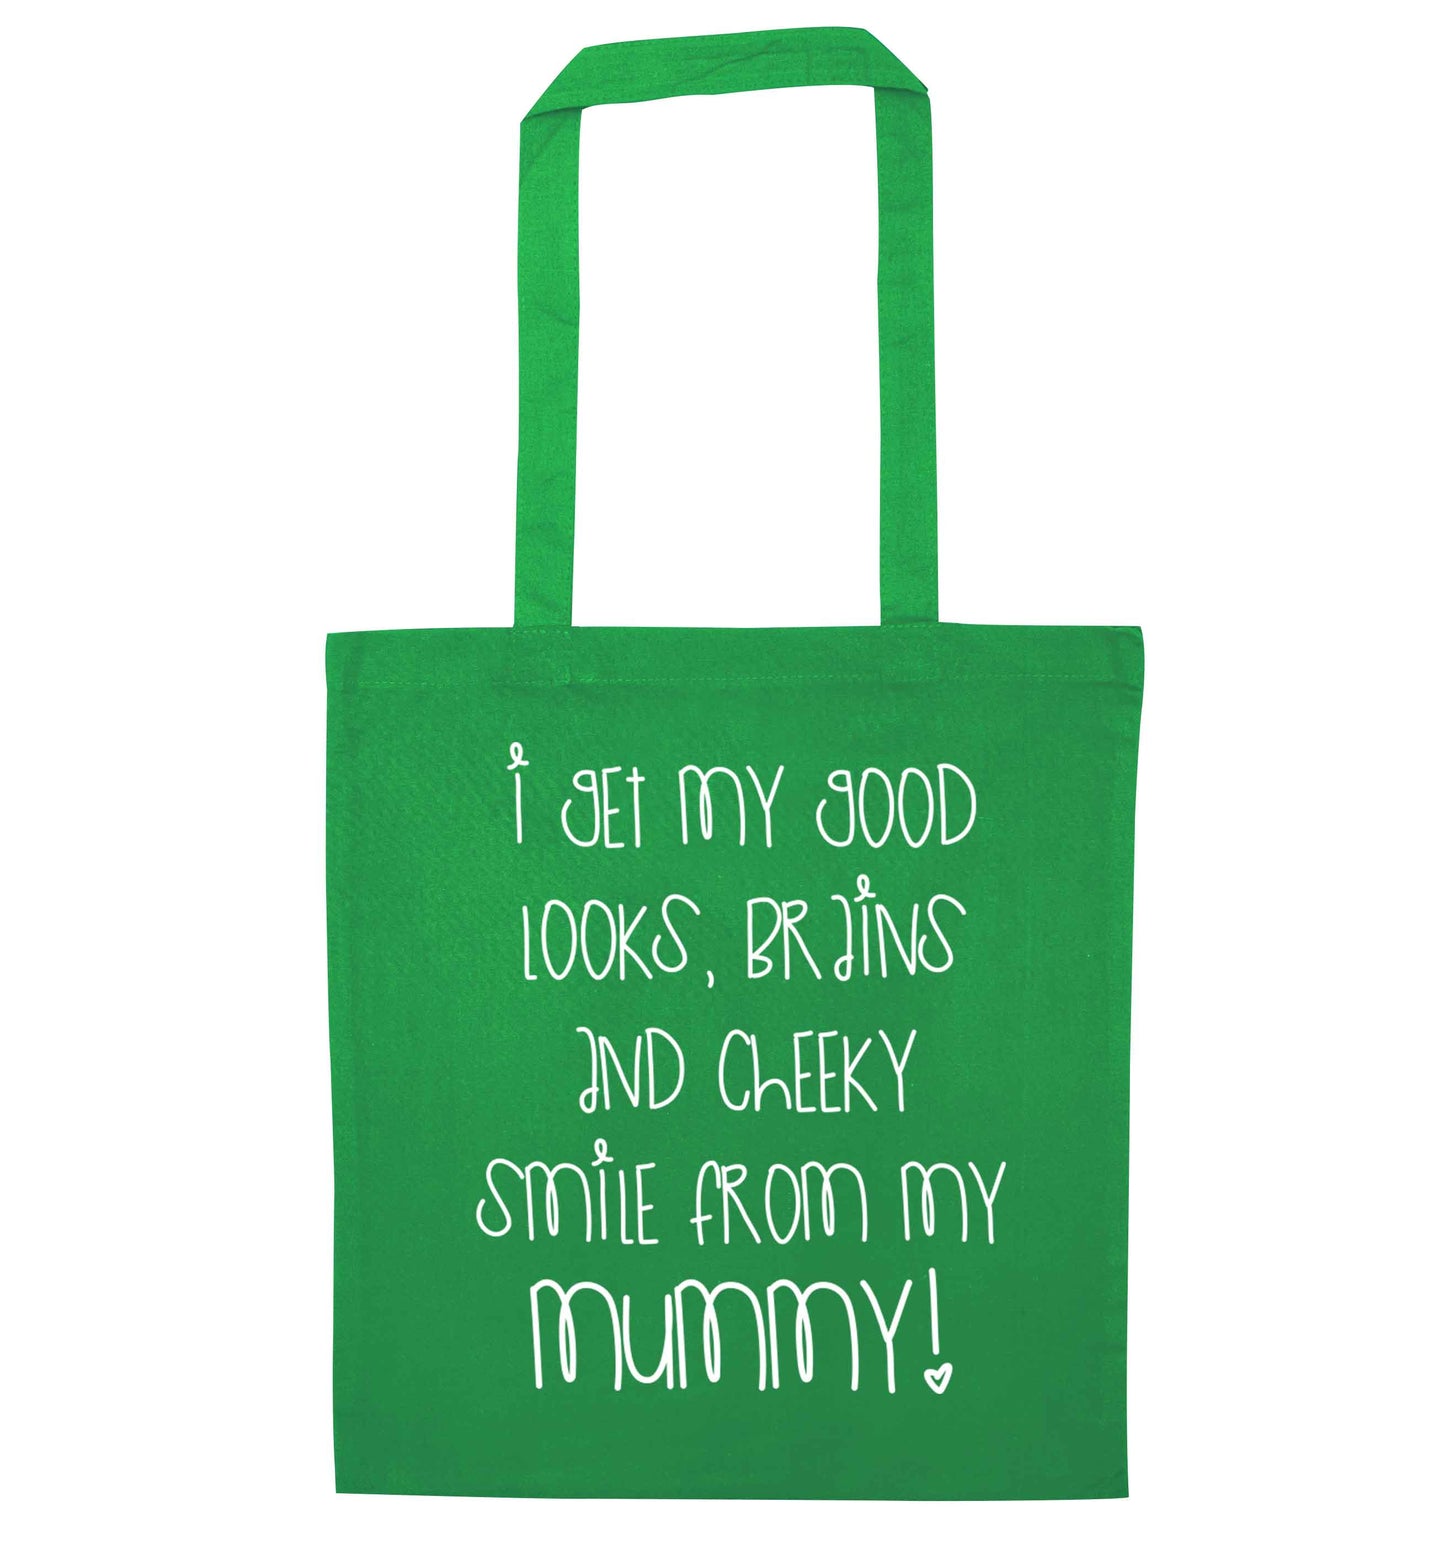 I get my good looks, brains and cheeky smile from my mummy green tote bag